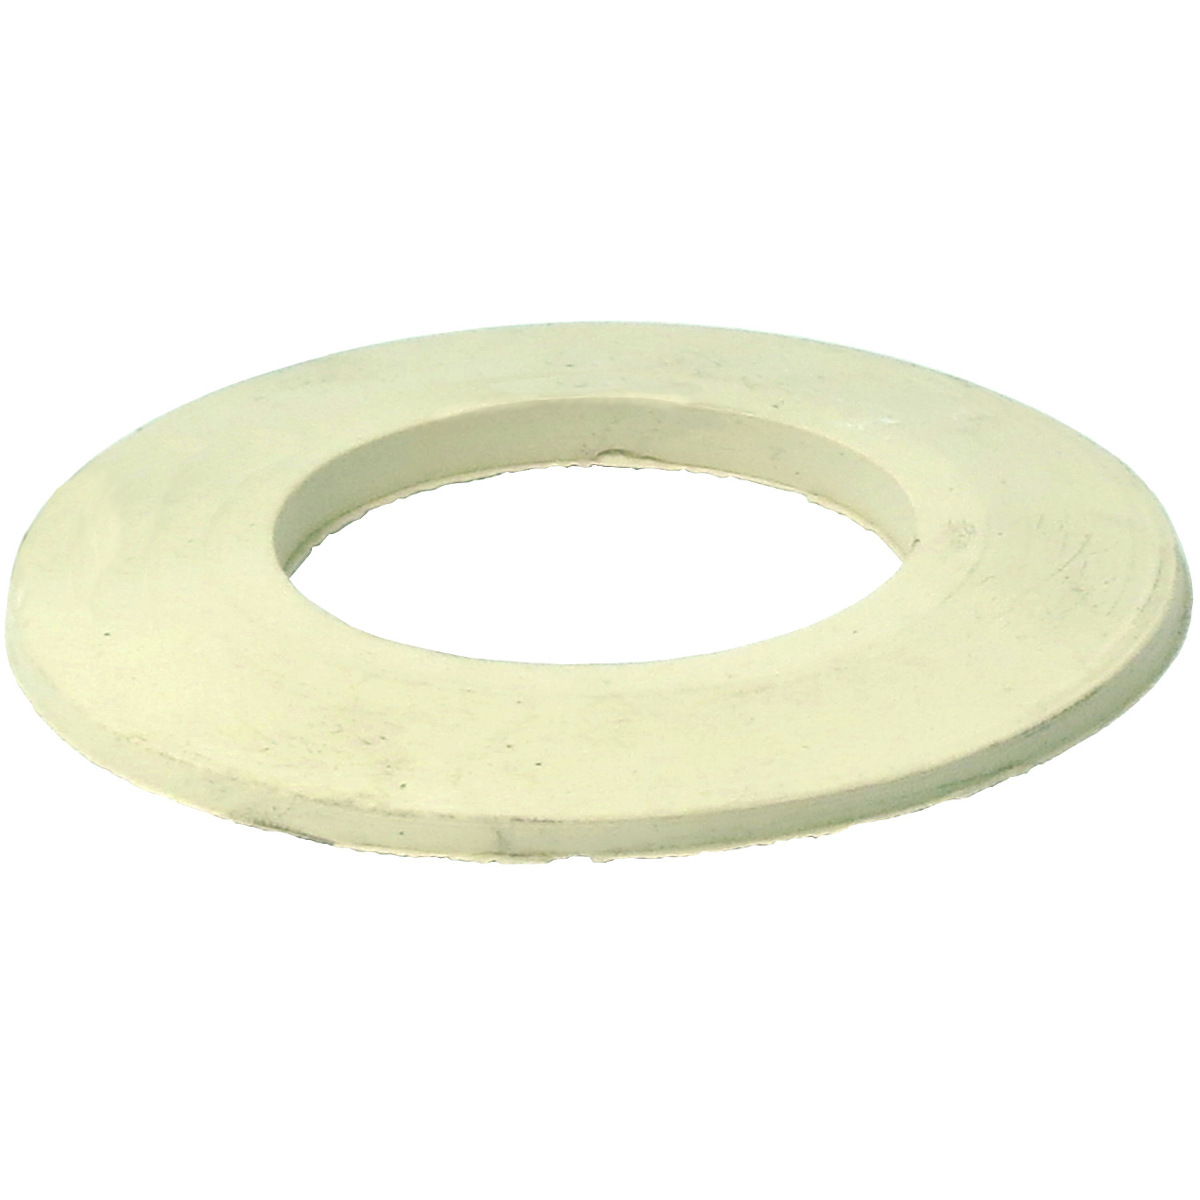 CONICAL RUBBER SEALING WASHER